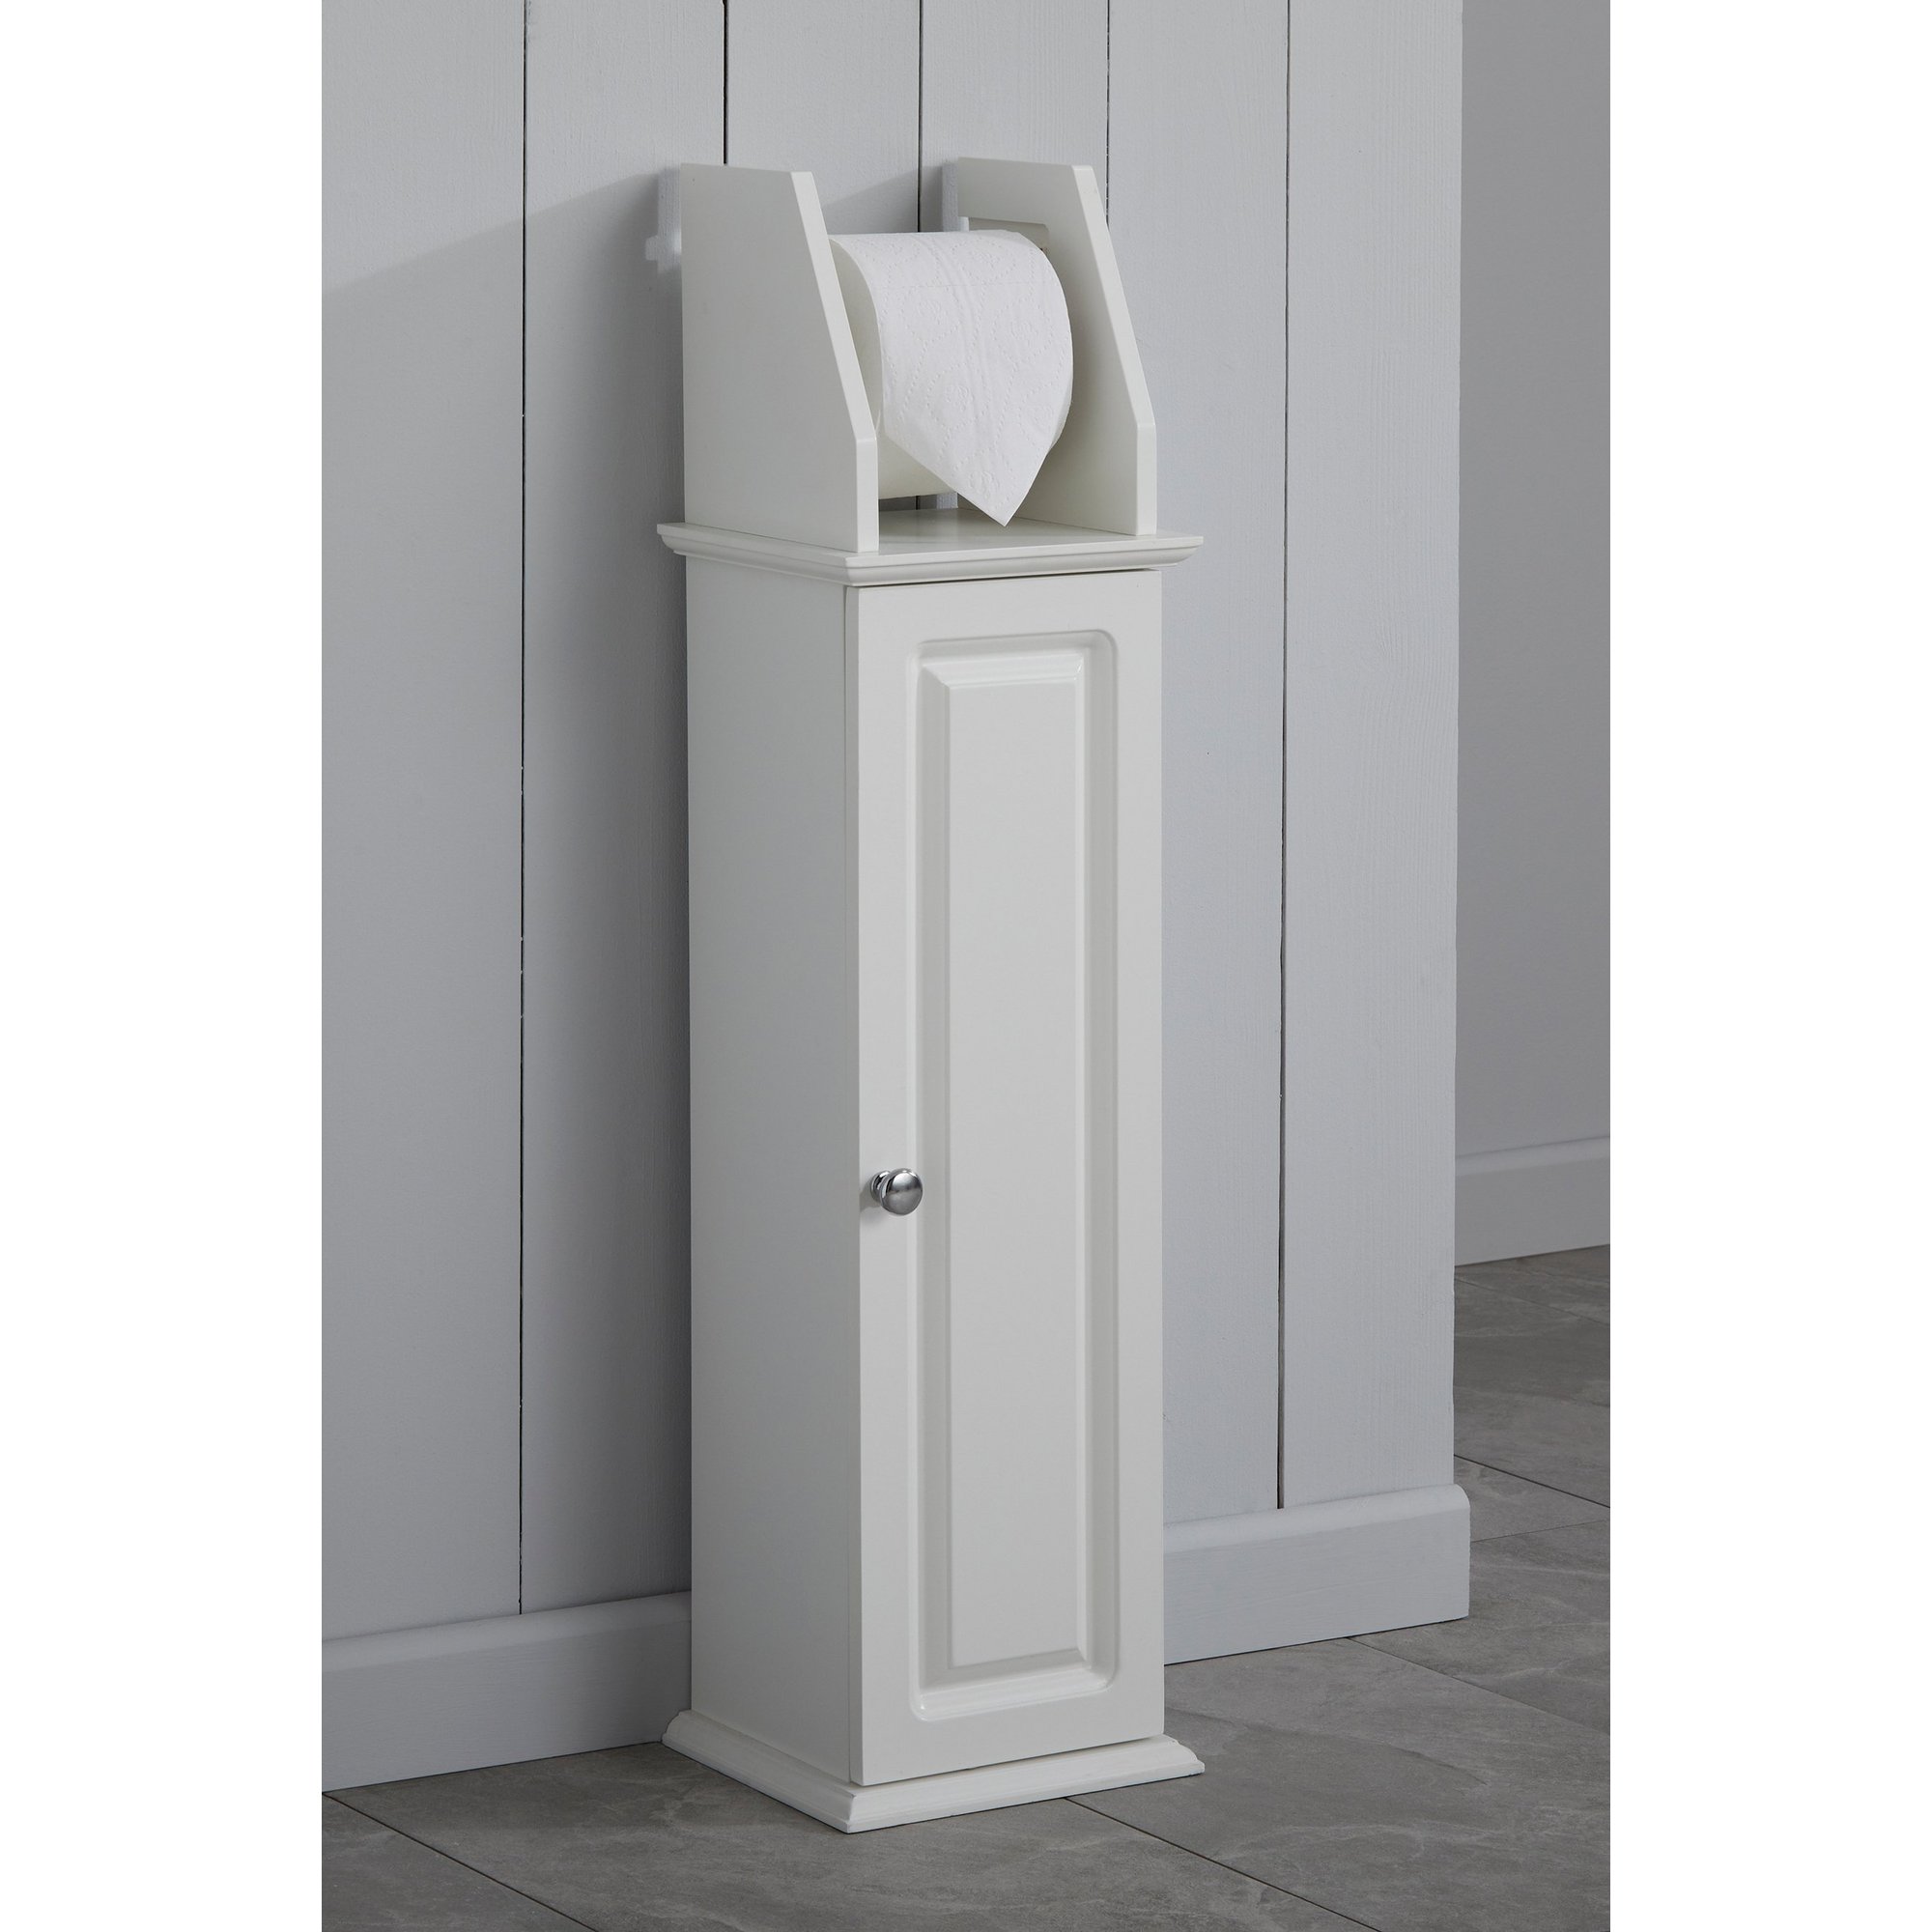 Toilet Roll Holder and Cupboard